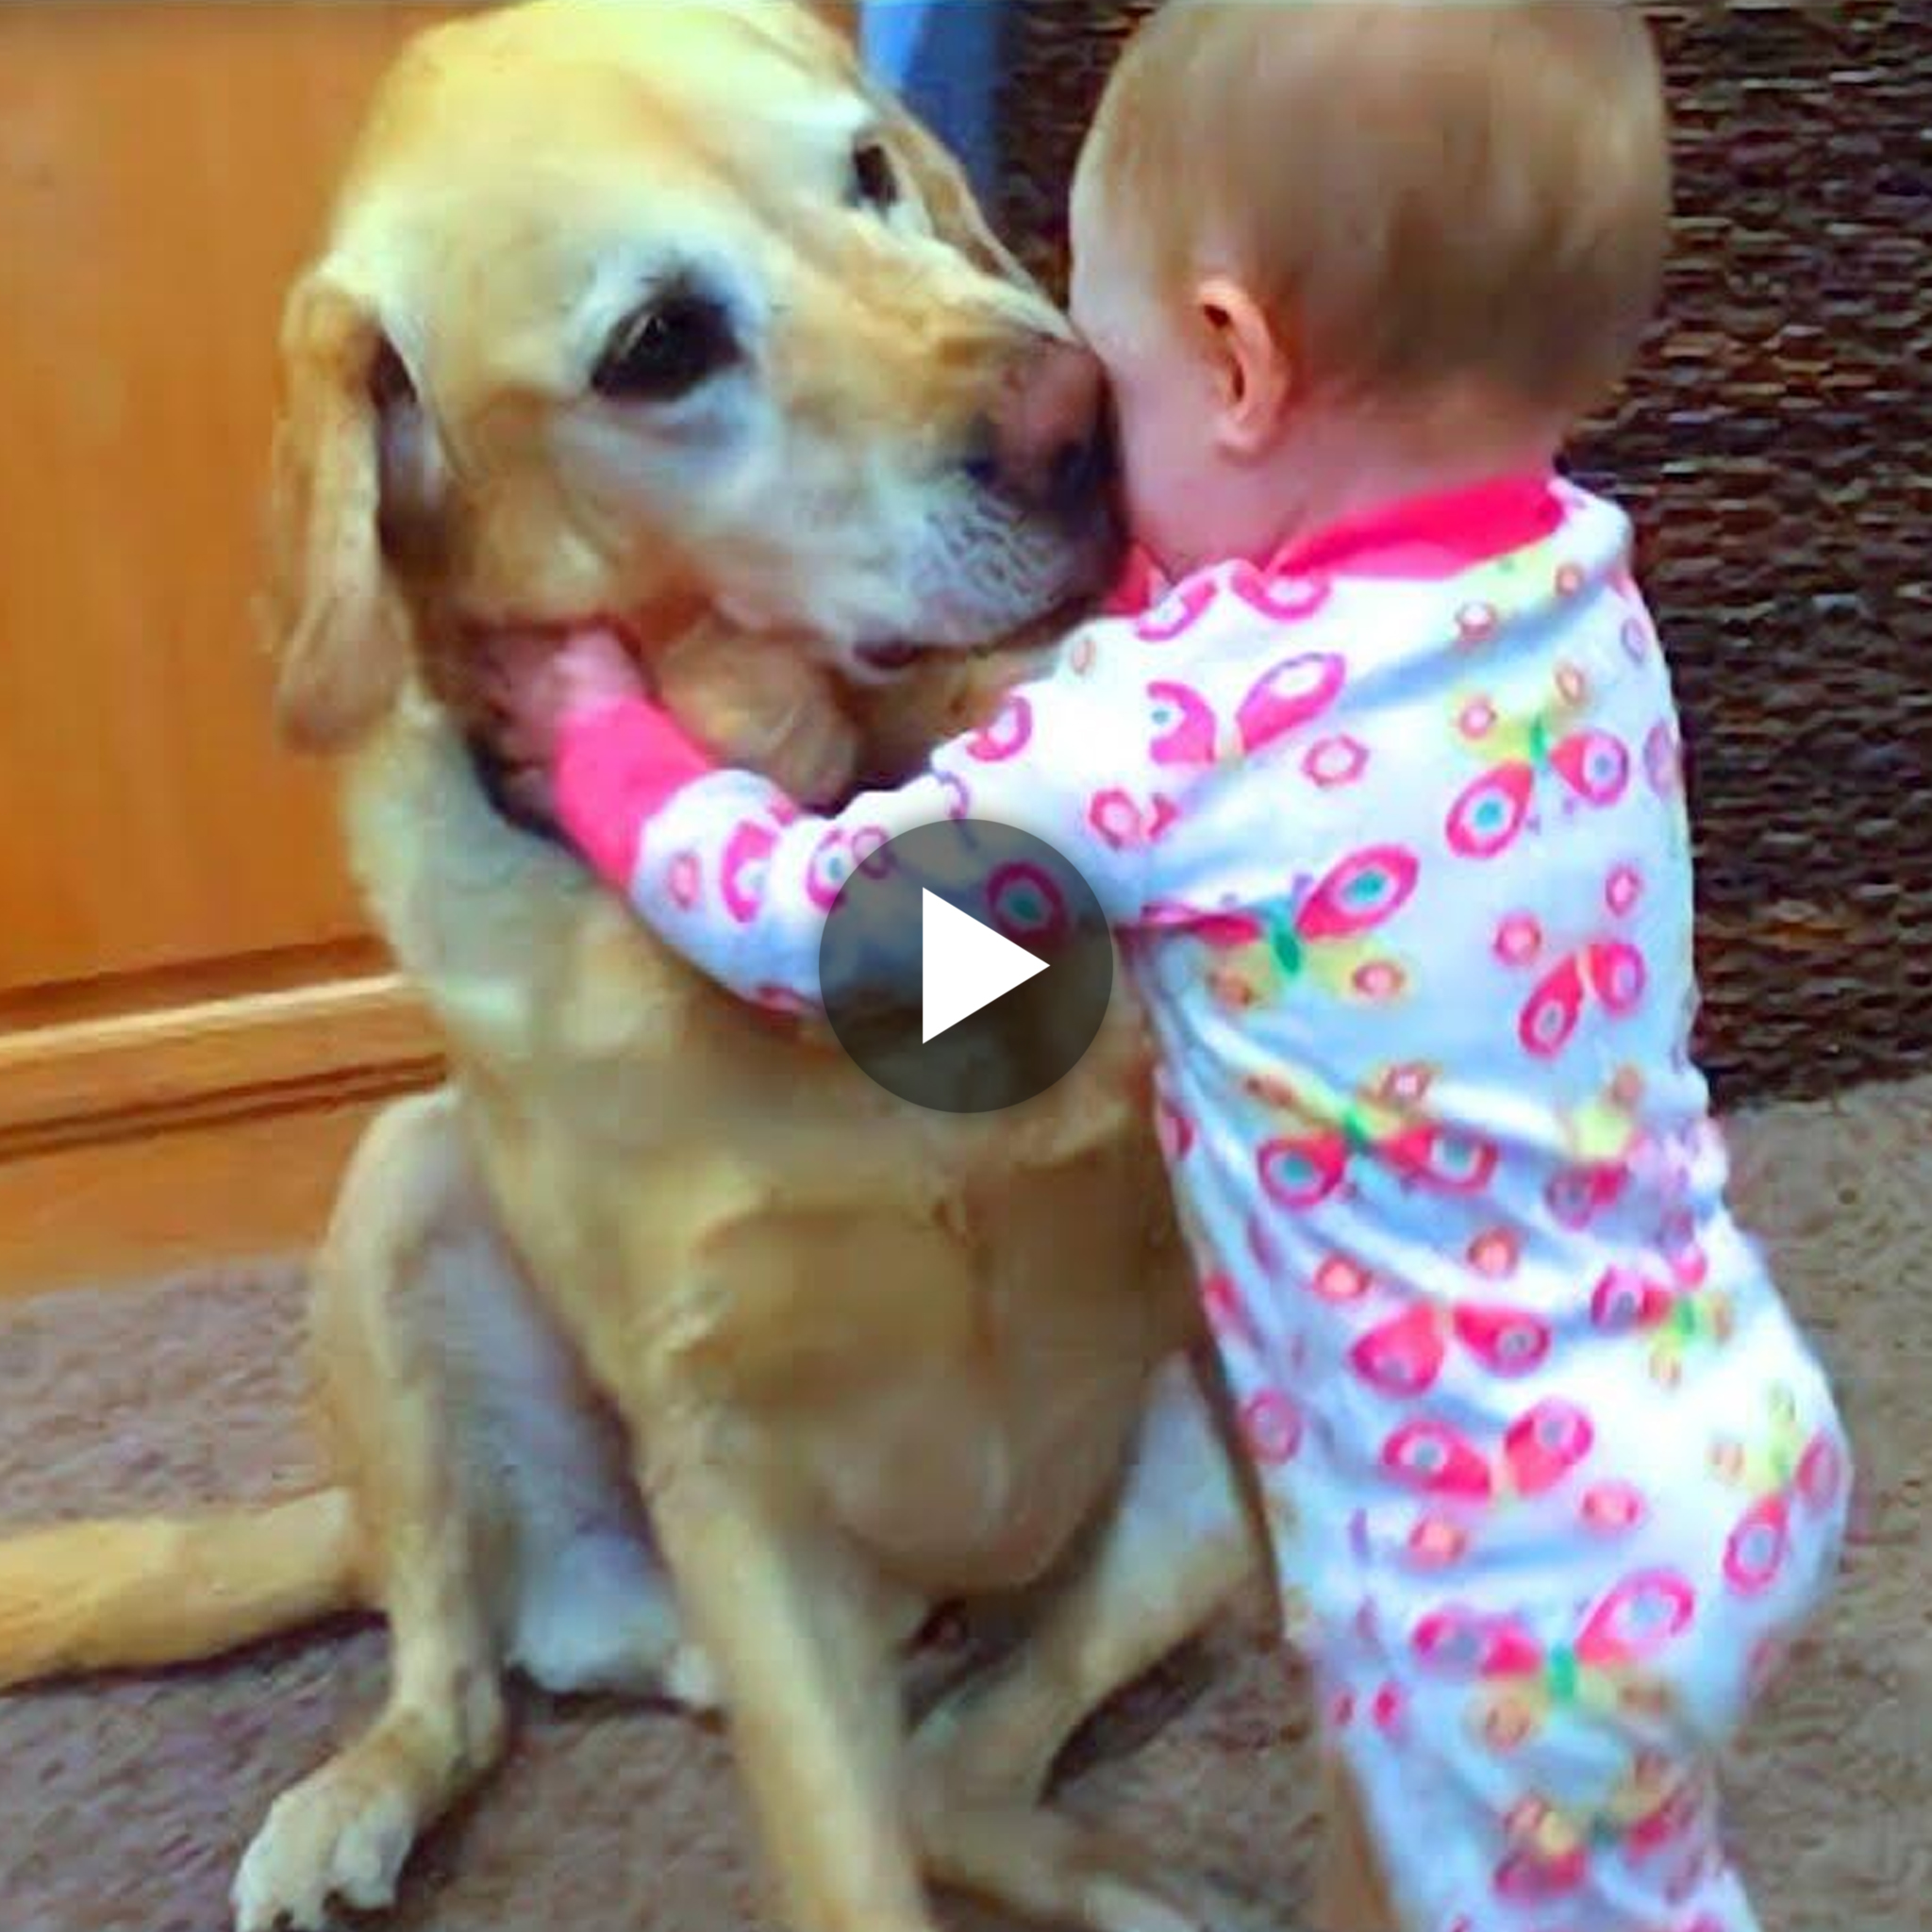 In a touching moment, the adorable dog gives the crying child a tender hug that is as consoling as the gentle sound of unconditional love.